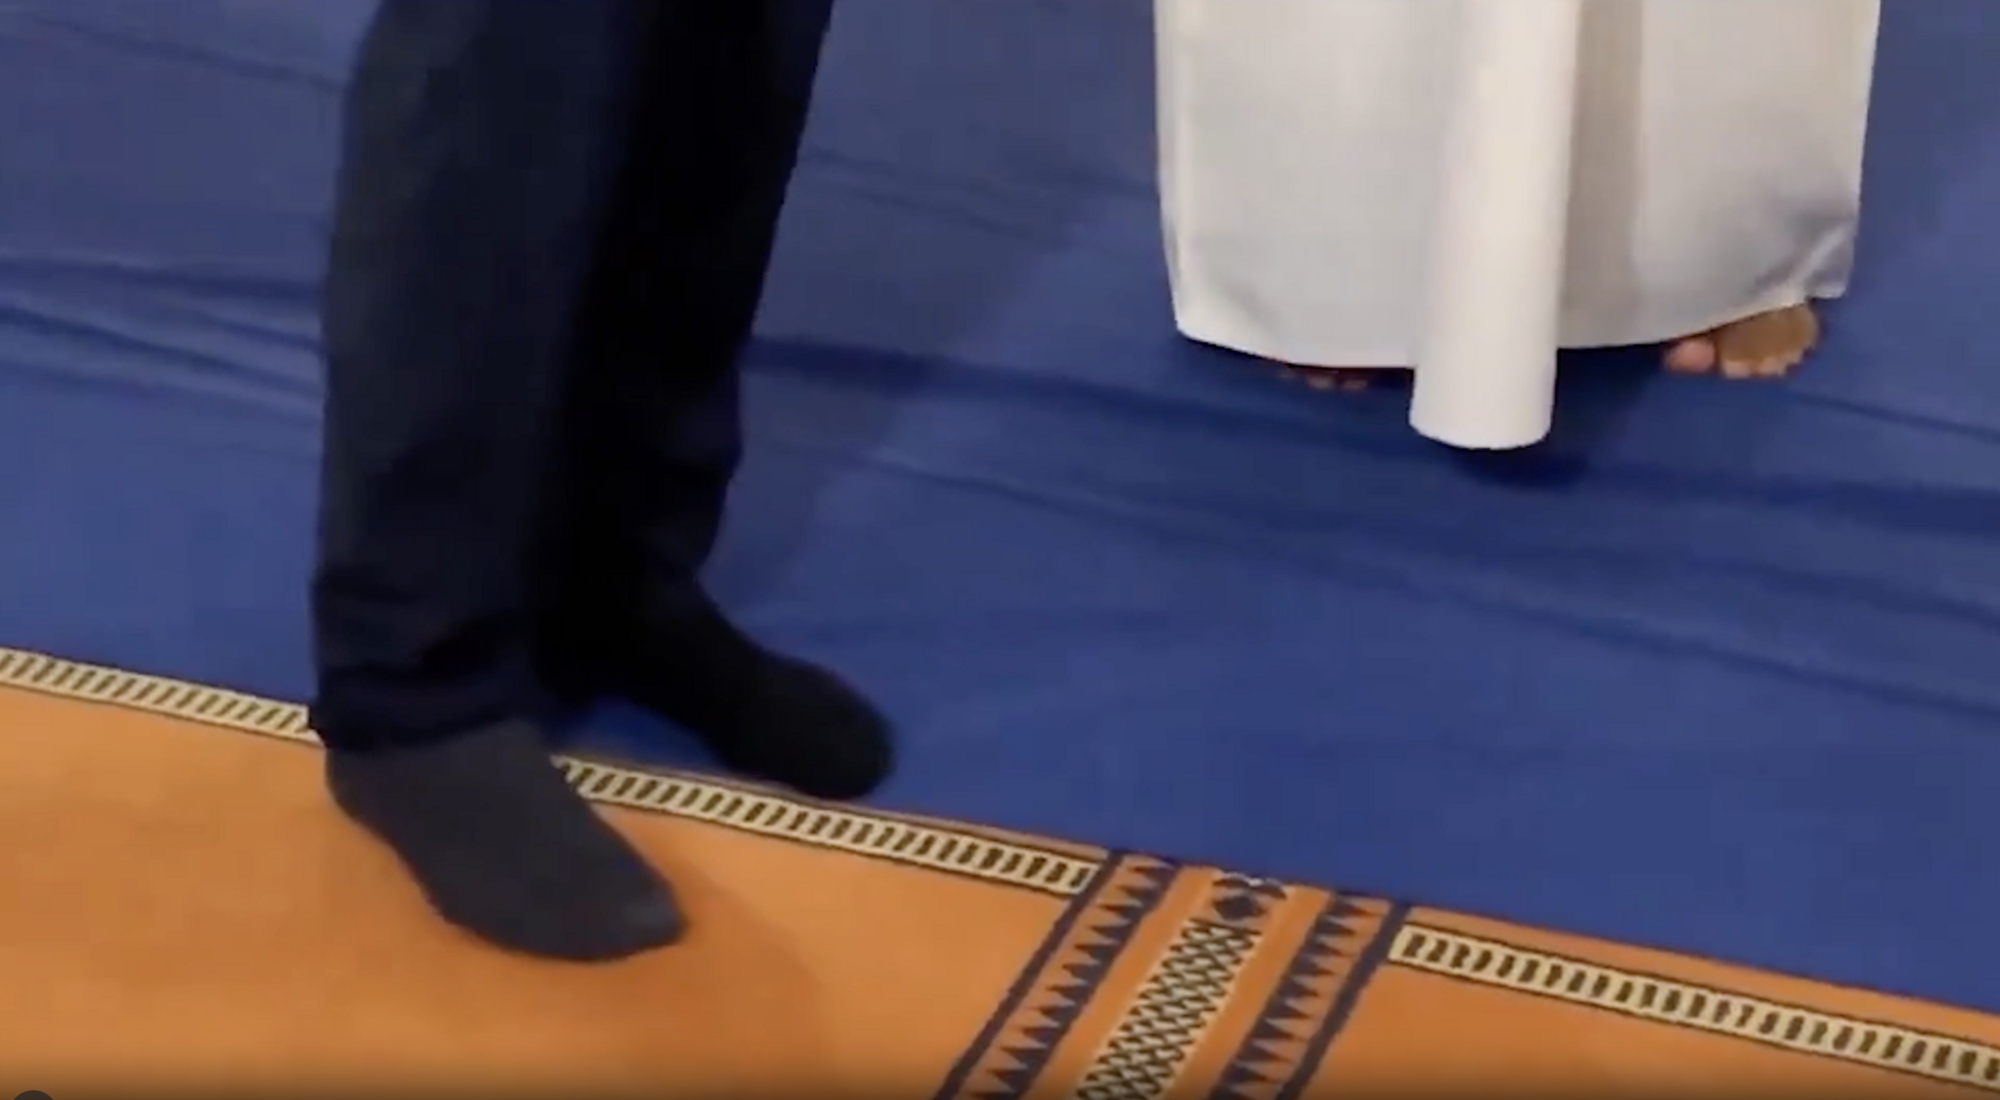 During a visit to Oman, the Vice Chancellor of Germany took off his shoes in a mosque and showcased various socks: the awkward moment was caught on video